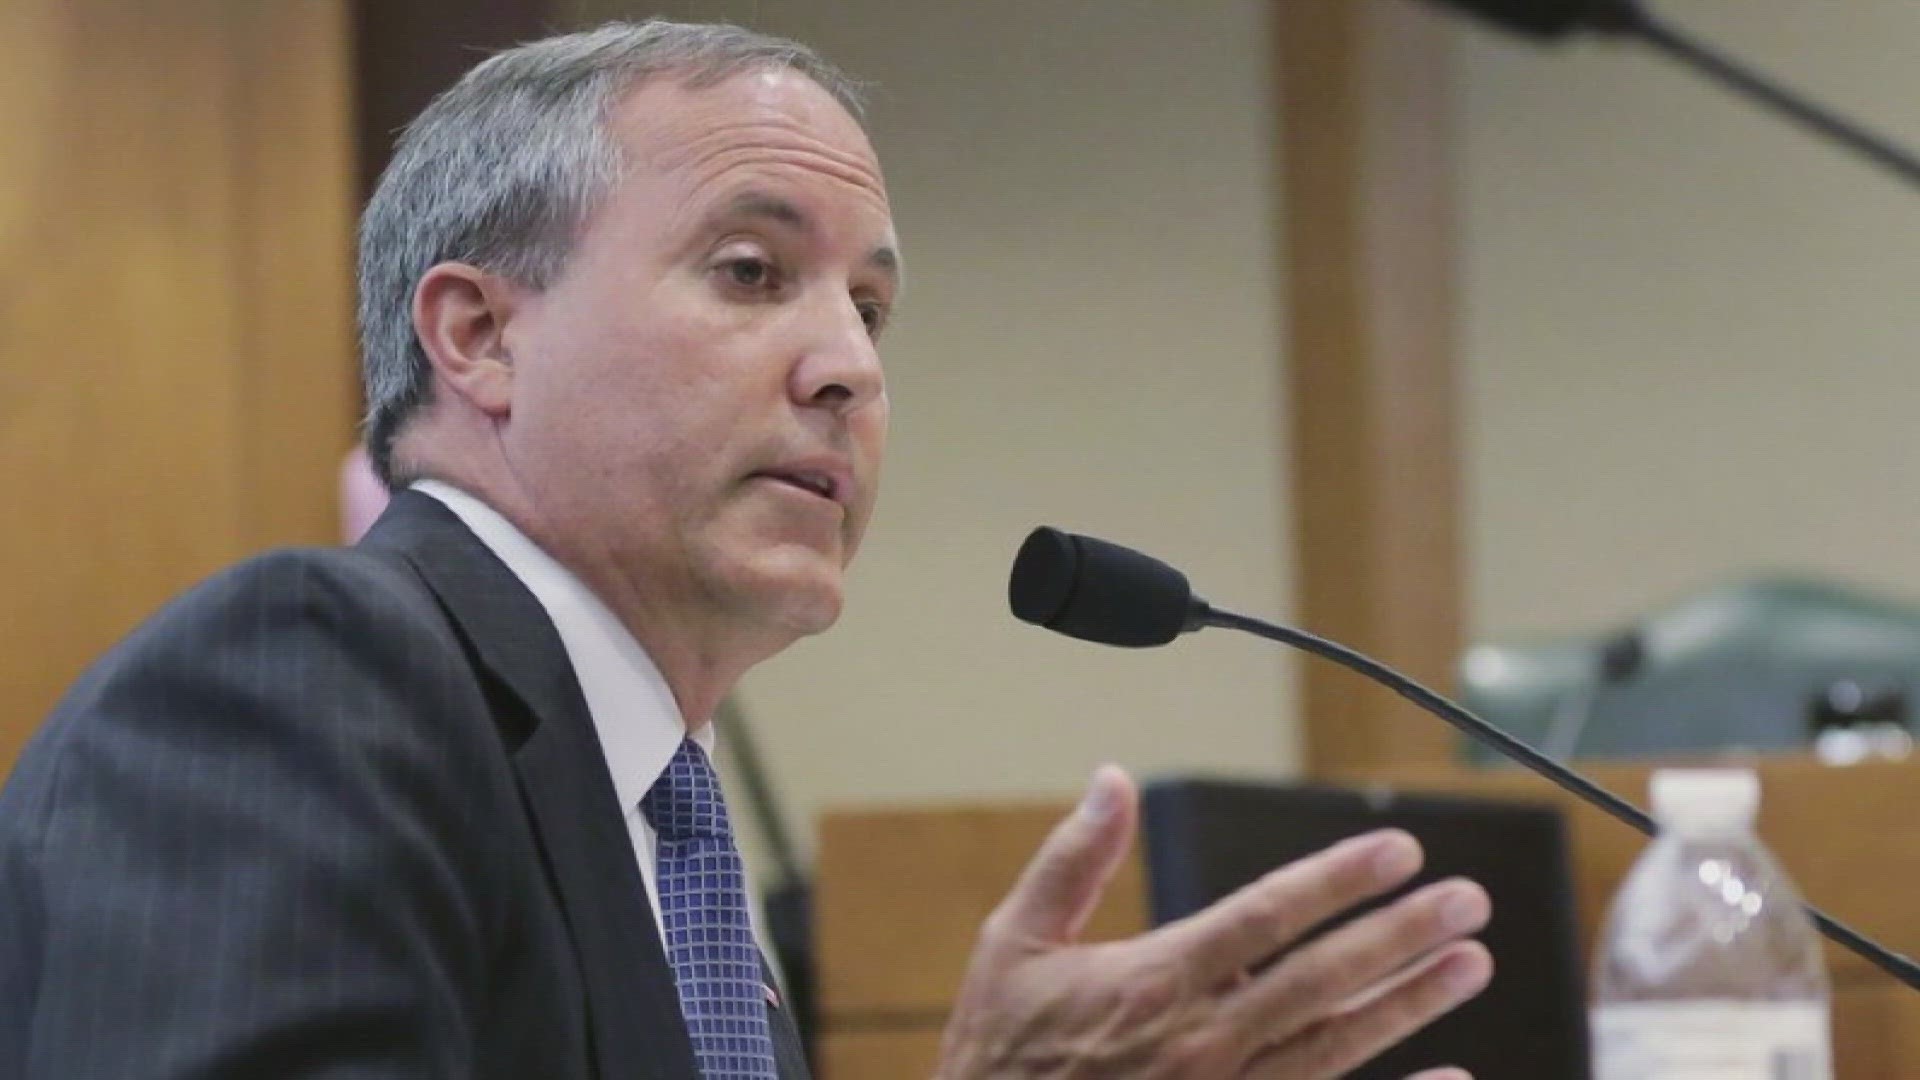 Paxton’s lawyers filed a motion that asks Dan Patrick to disqualify two senators of San Antonio and one of Dallas, arguing they have a proven bias against him.